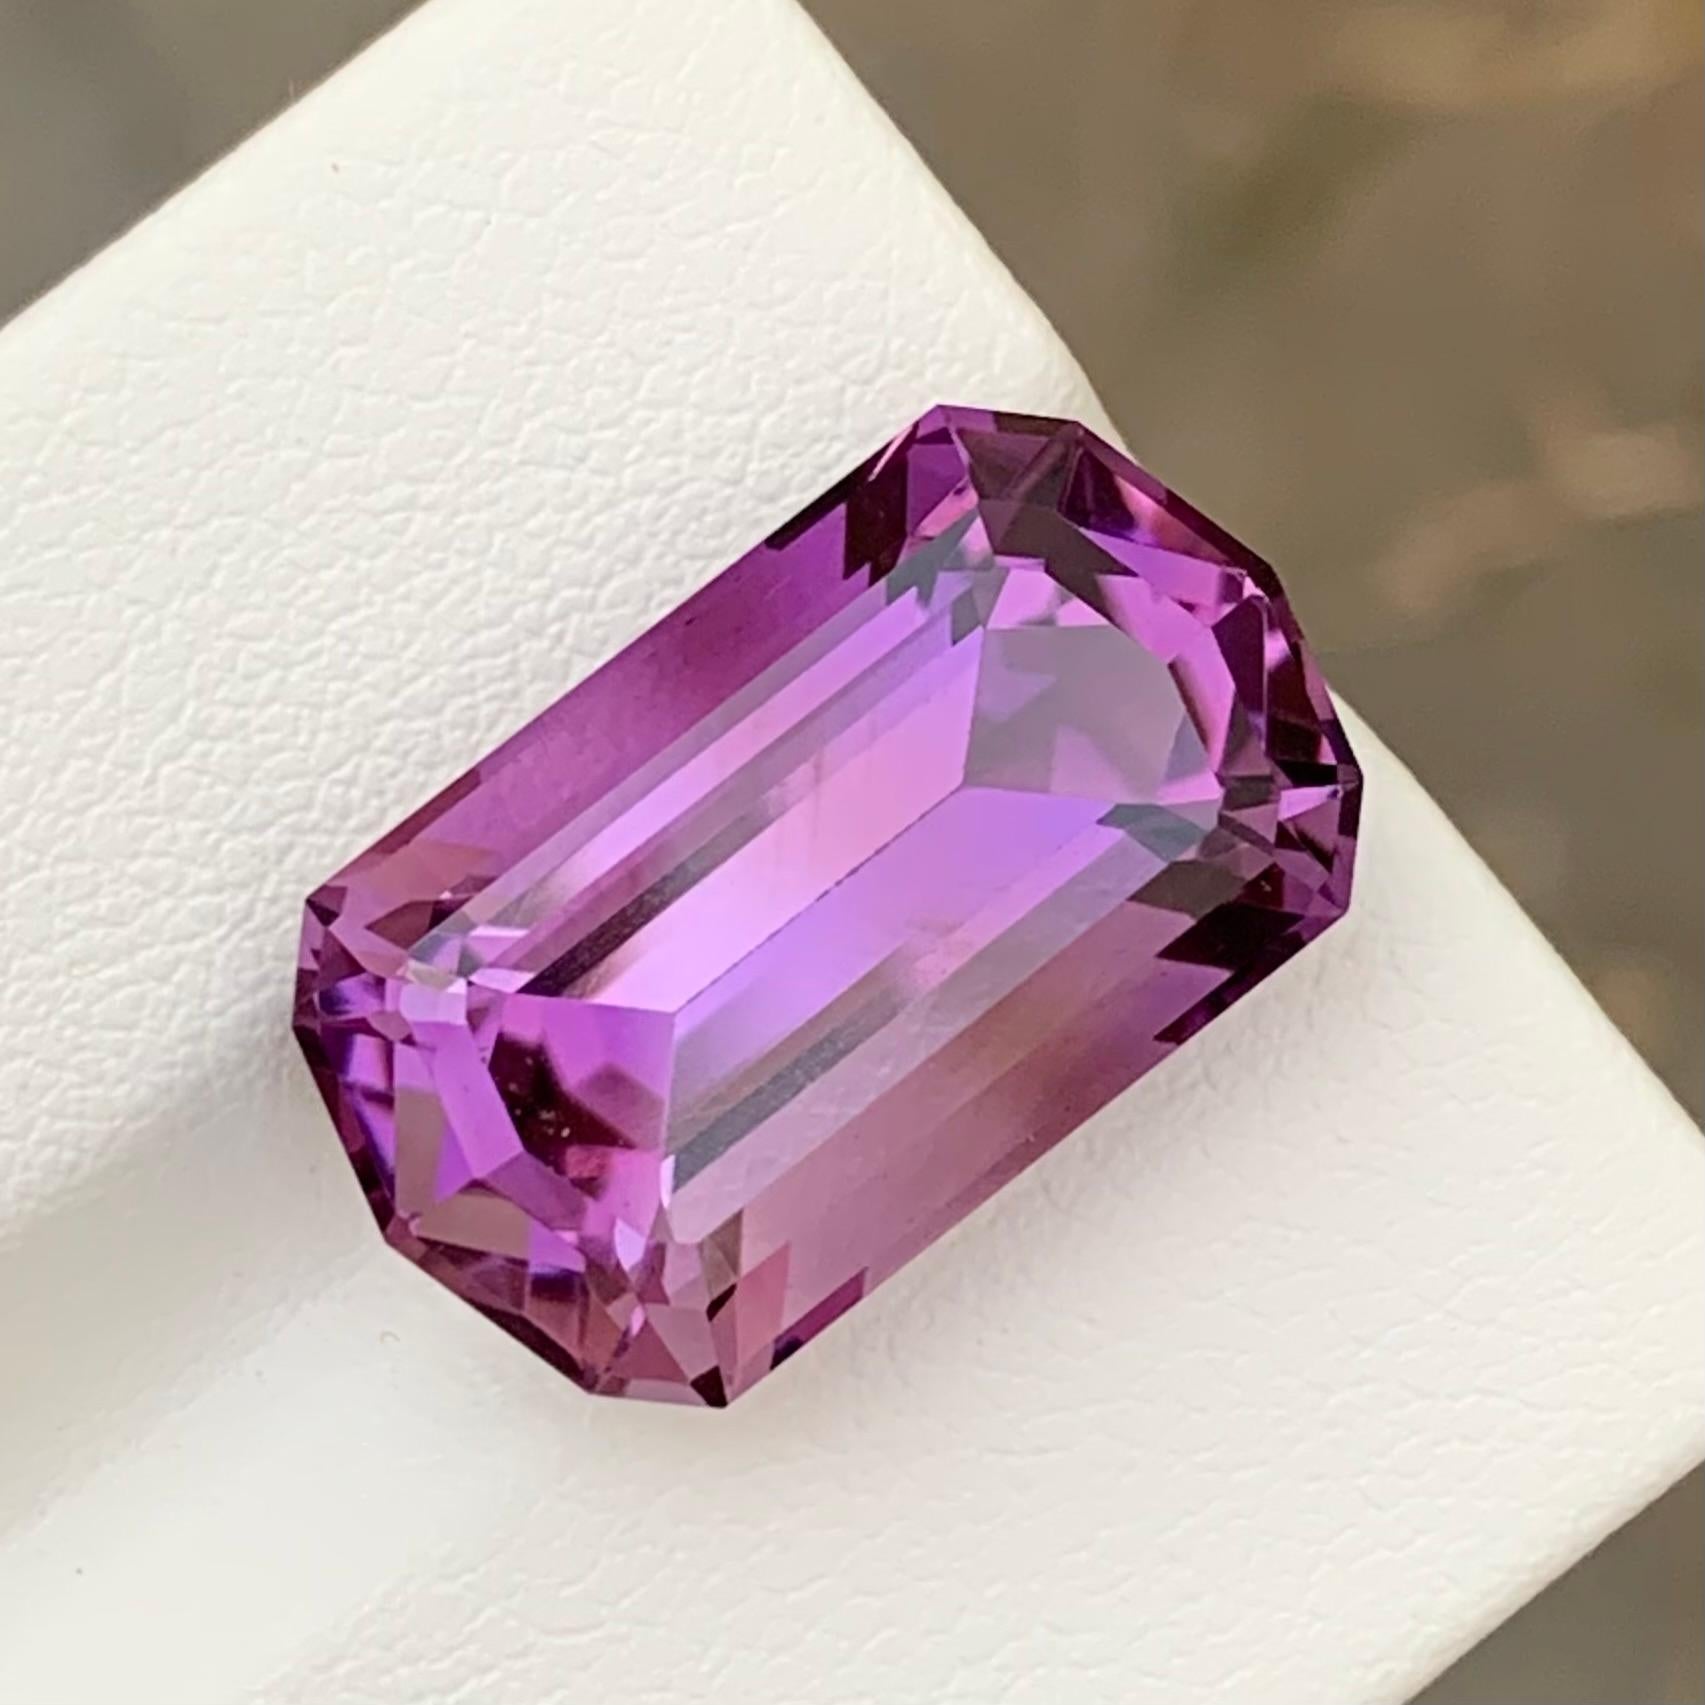 Loose Amethyst
Weight: 13.85 Carats
Dimension: 18.9 x 11.1 x 9.6 Mm
Colour: Purple
Origin: Brazil
Treatment: Non
Certificate: On Demand
Shape: Emerald


Amethyst, a stunning variety of quartz known for its mesmerizing purple hue, has captivated